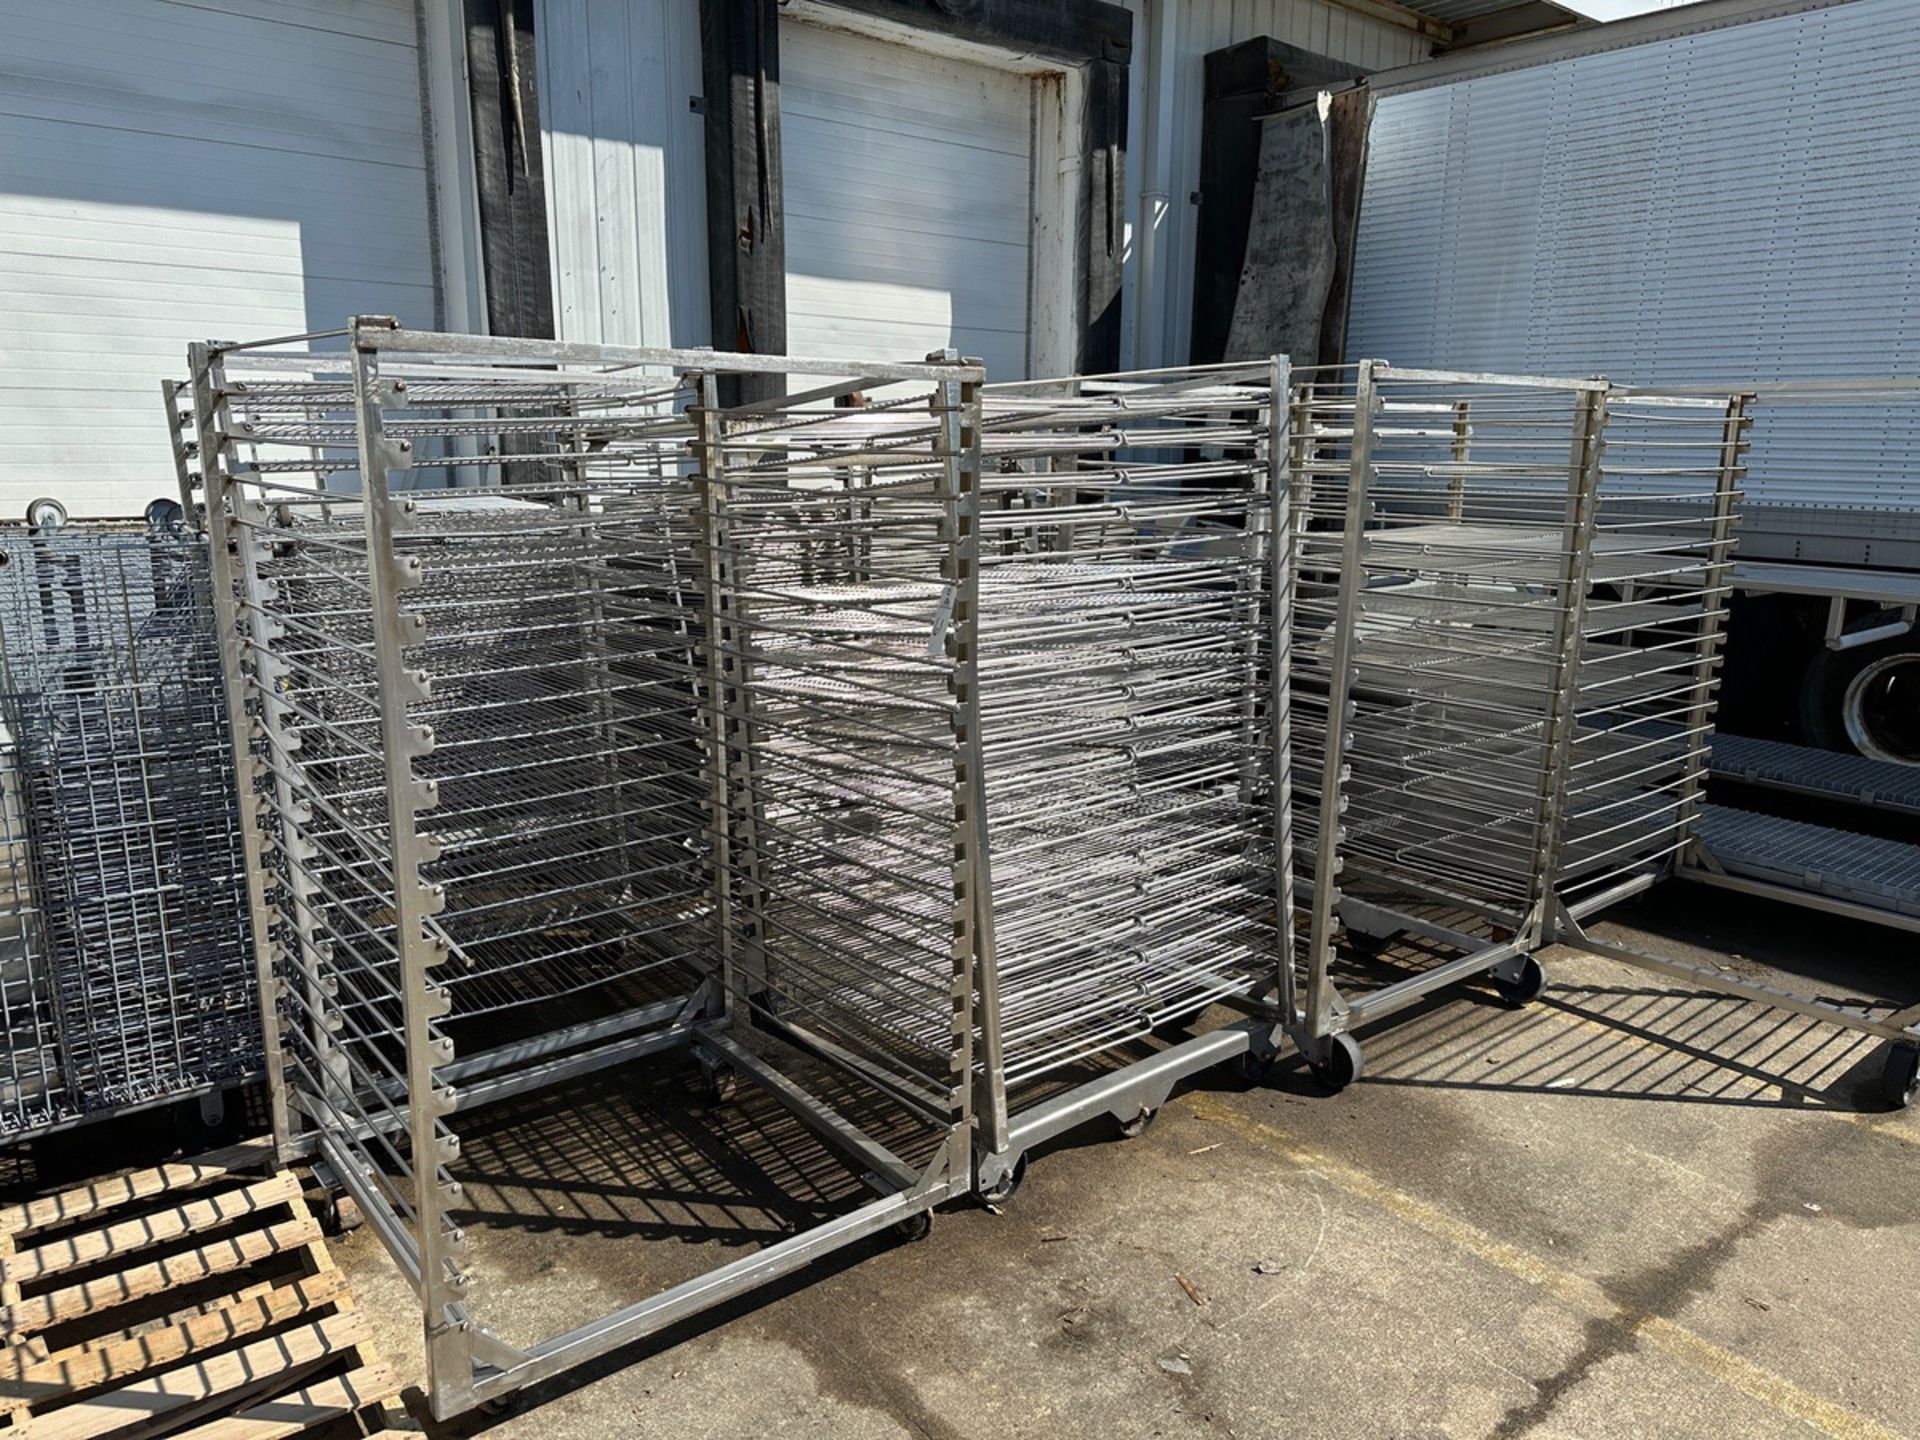 Lot of (5) Alkar Stainless Steel Meat Carts and Screens (Approx. 43" x 41" Screens | Rig Fee $125